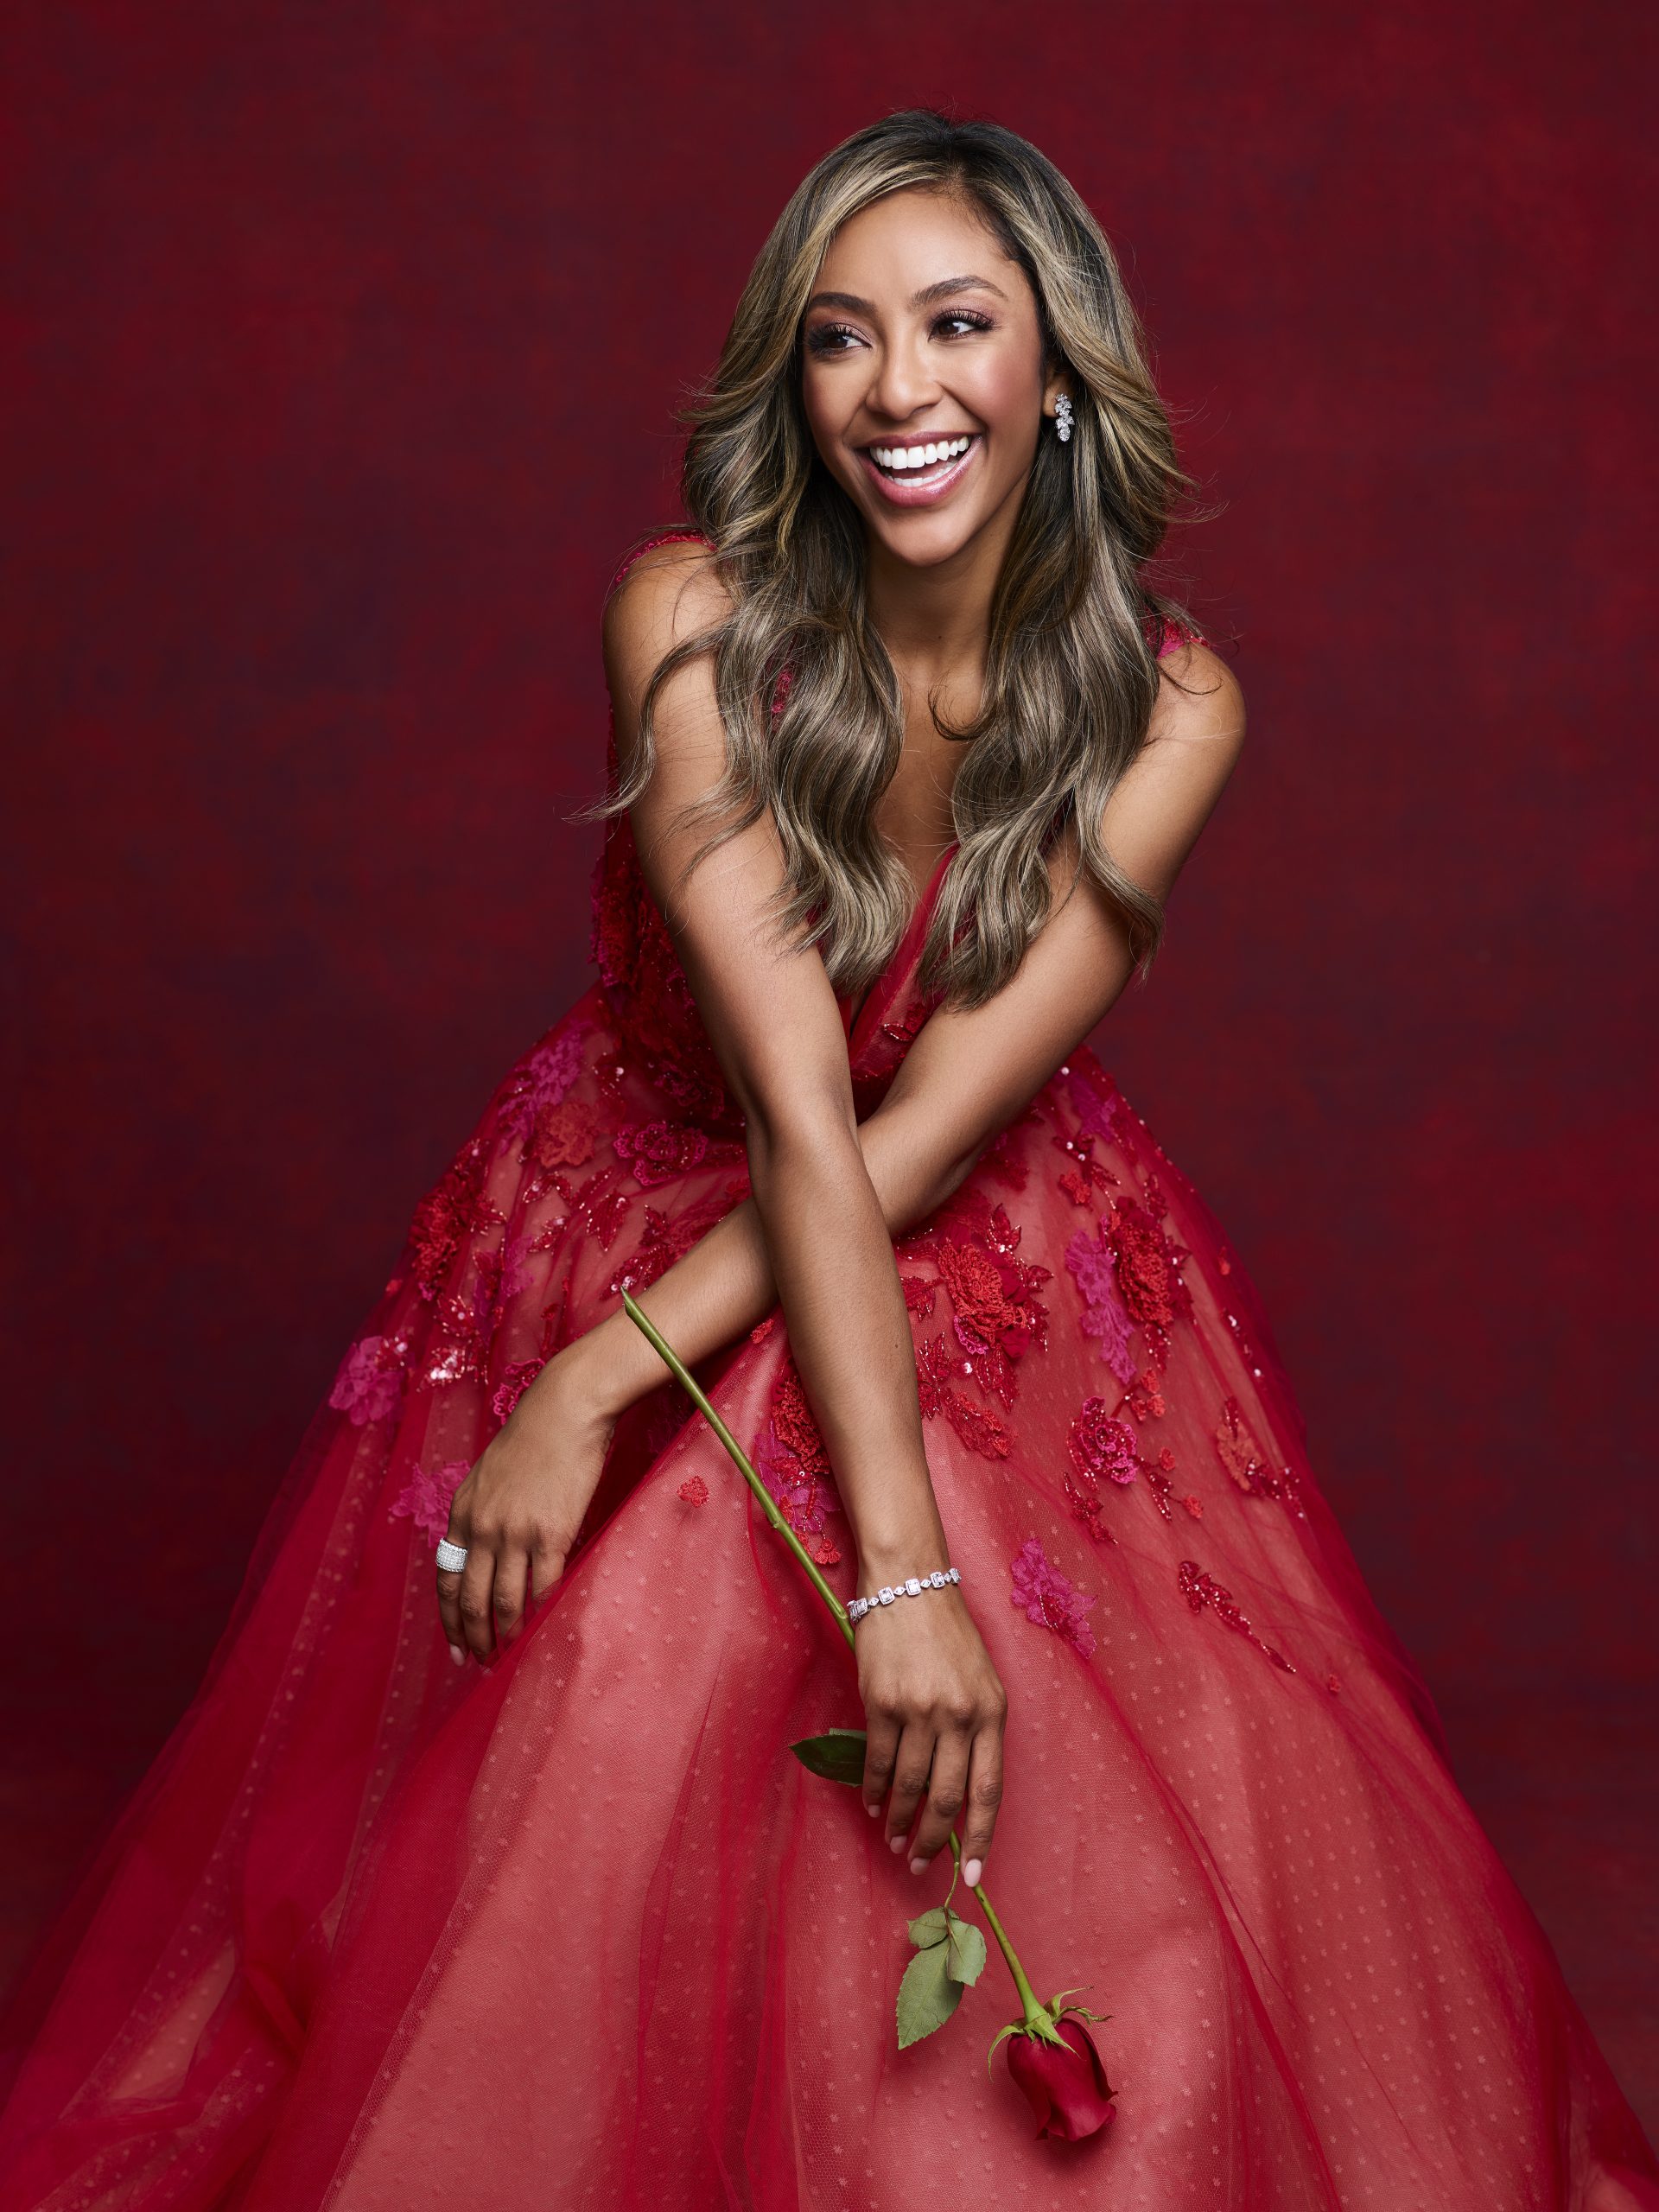 Oh My, There’s A New Bachelorette Tayshia Adams